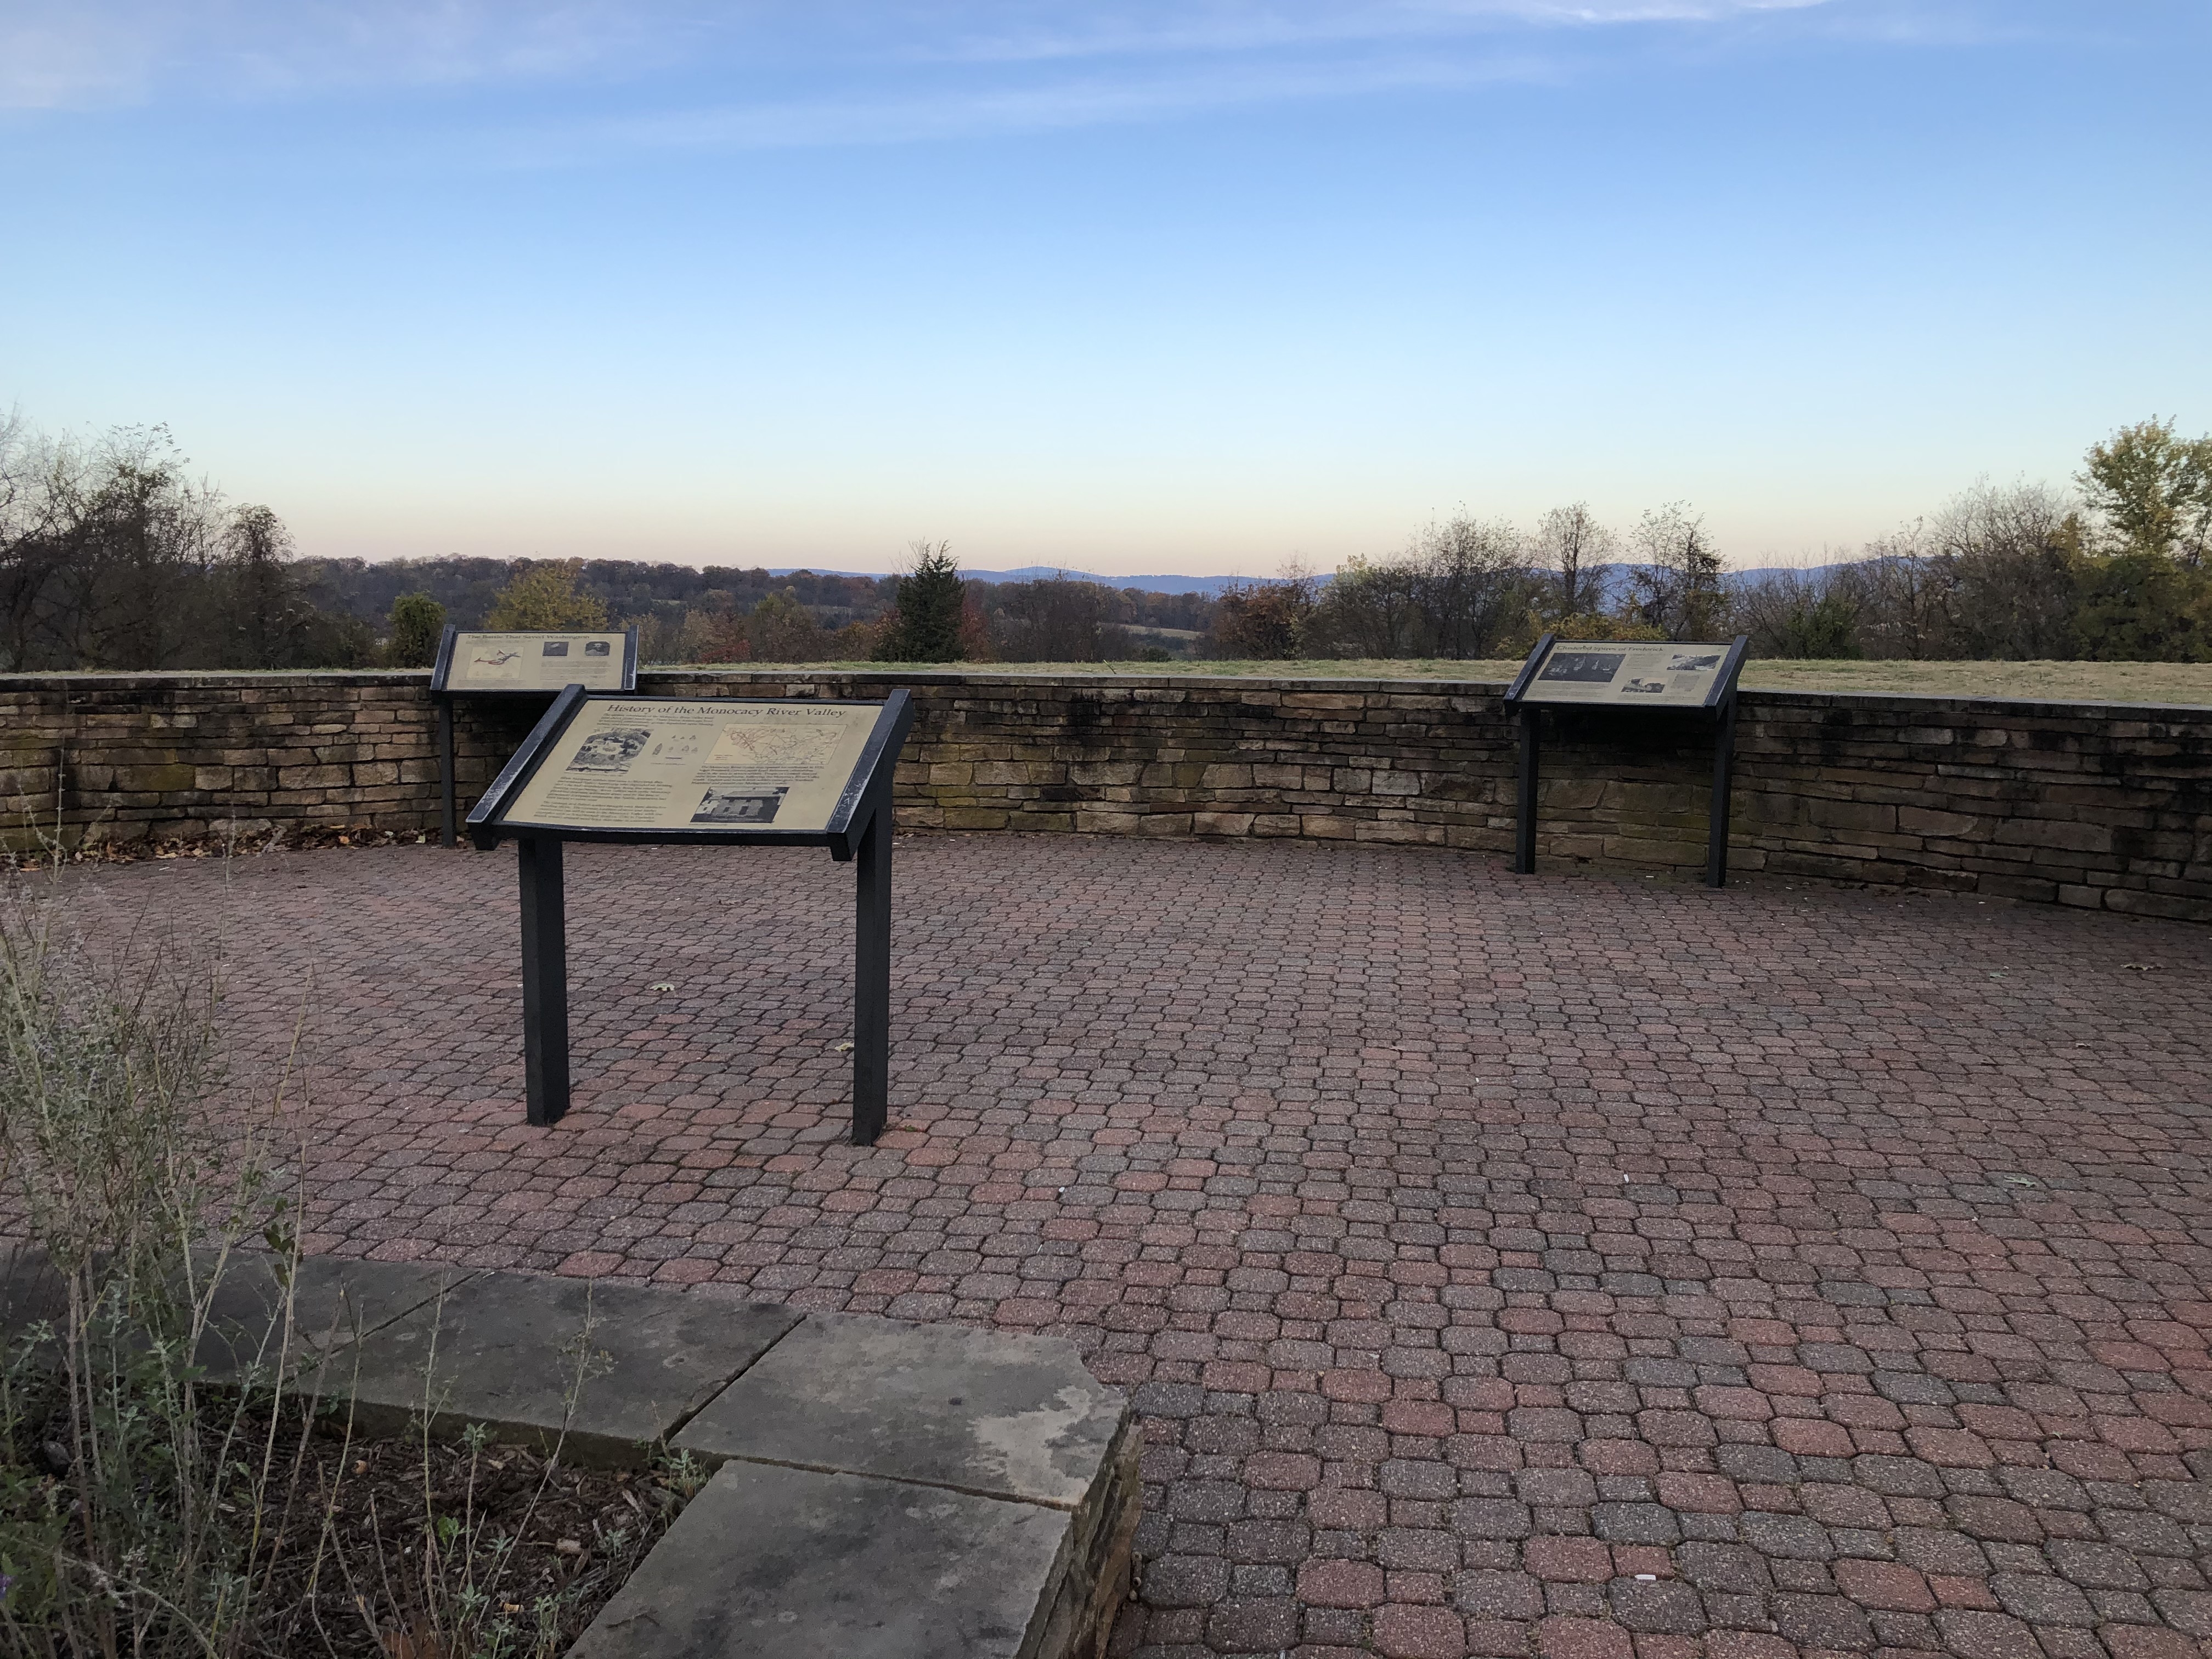 Markers at the Rest Stop / Overlook